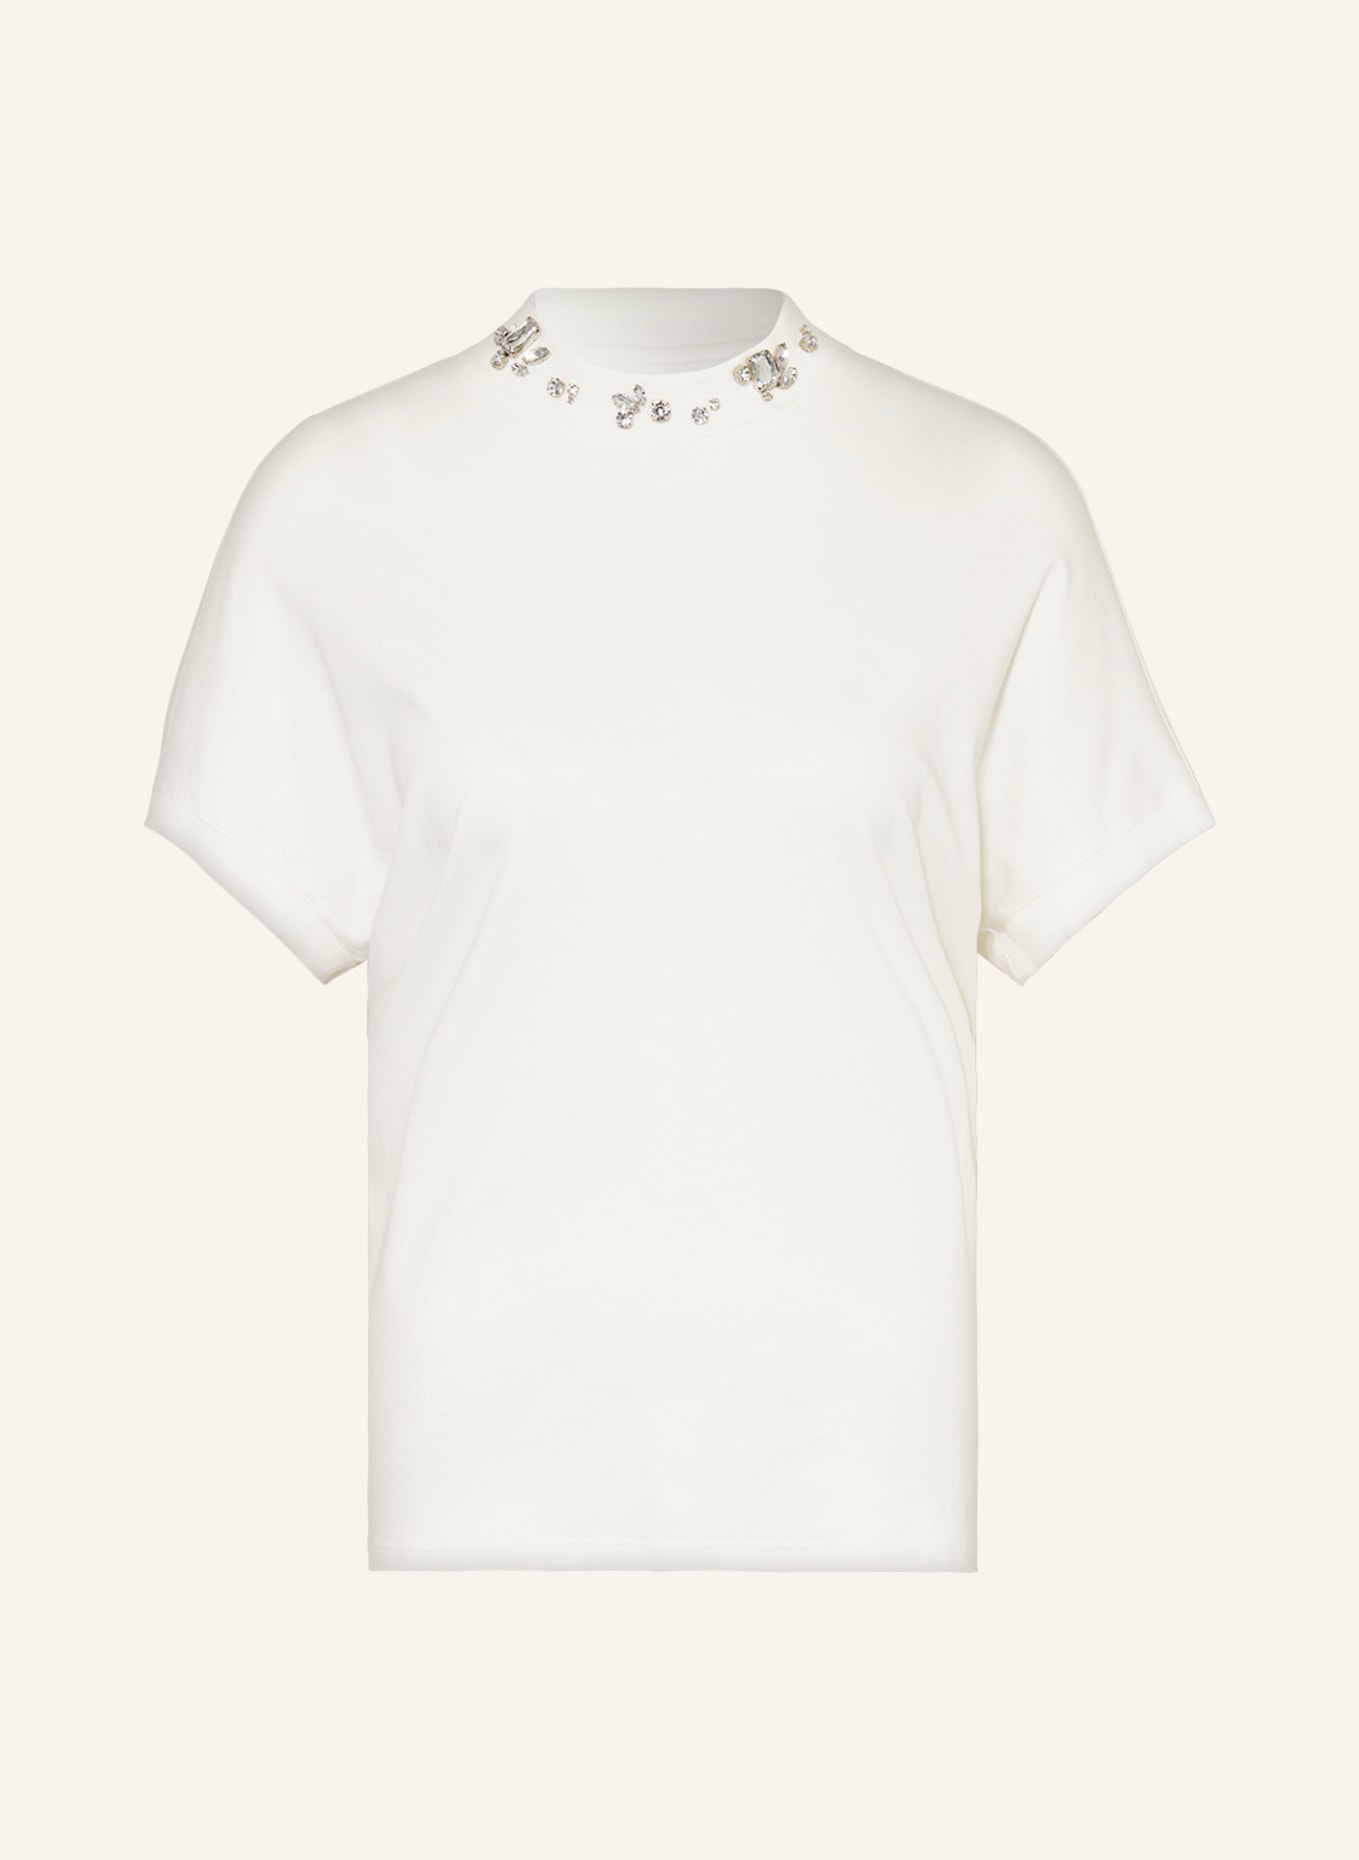 MARC CAIN T-shirt with decorative gems, Color: CREAM (Image 1)